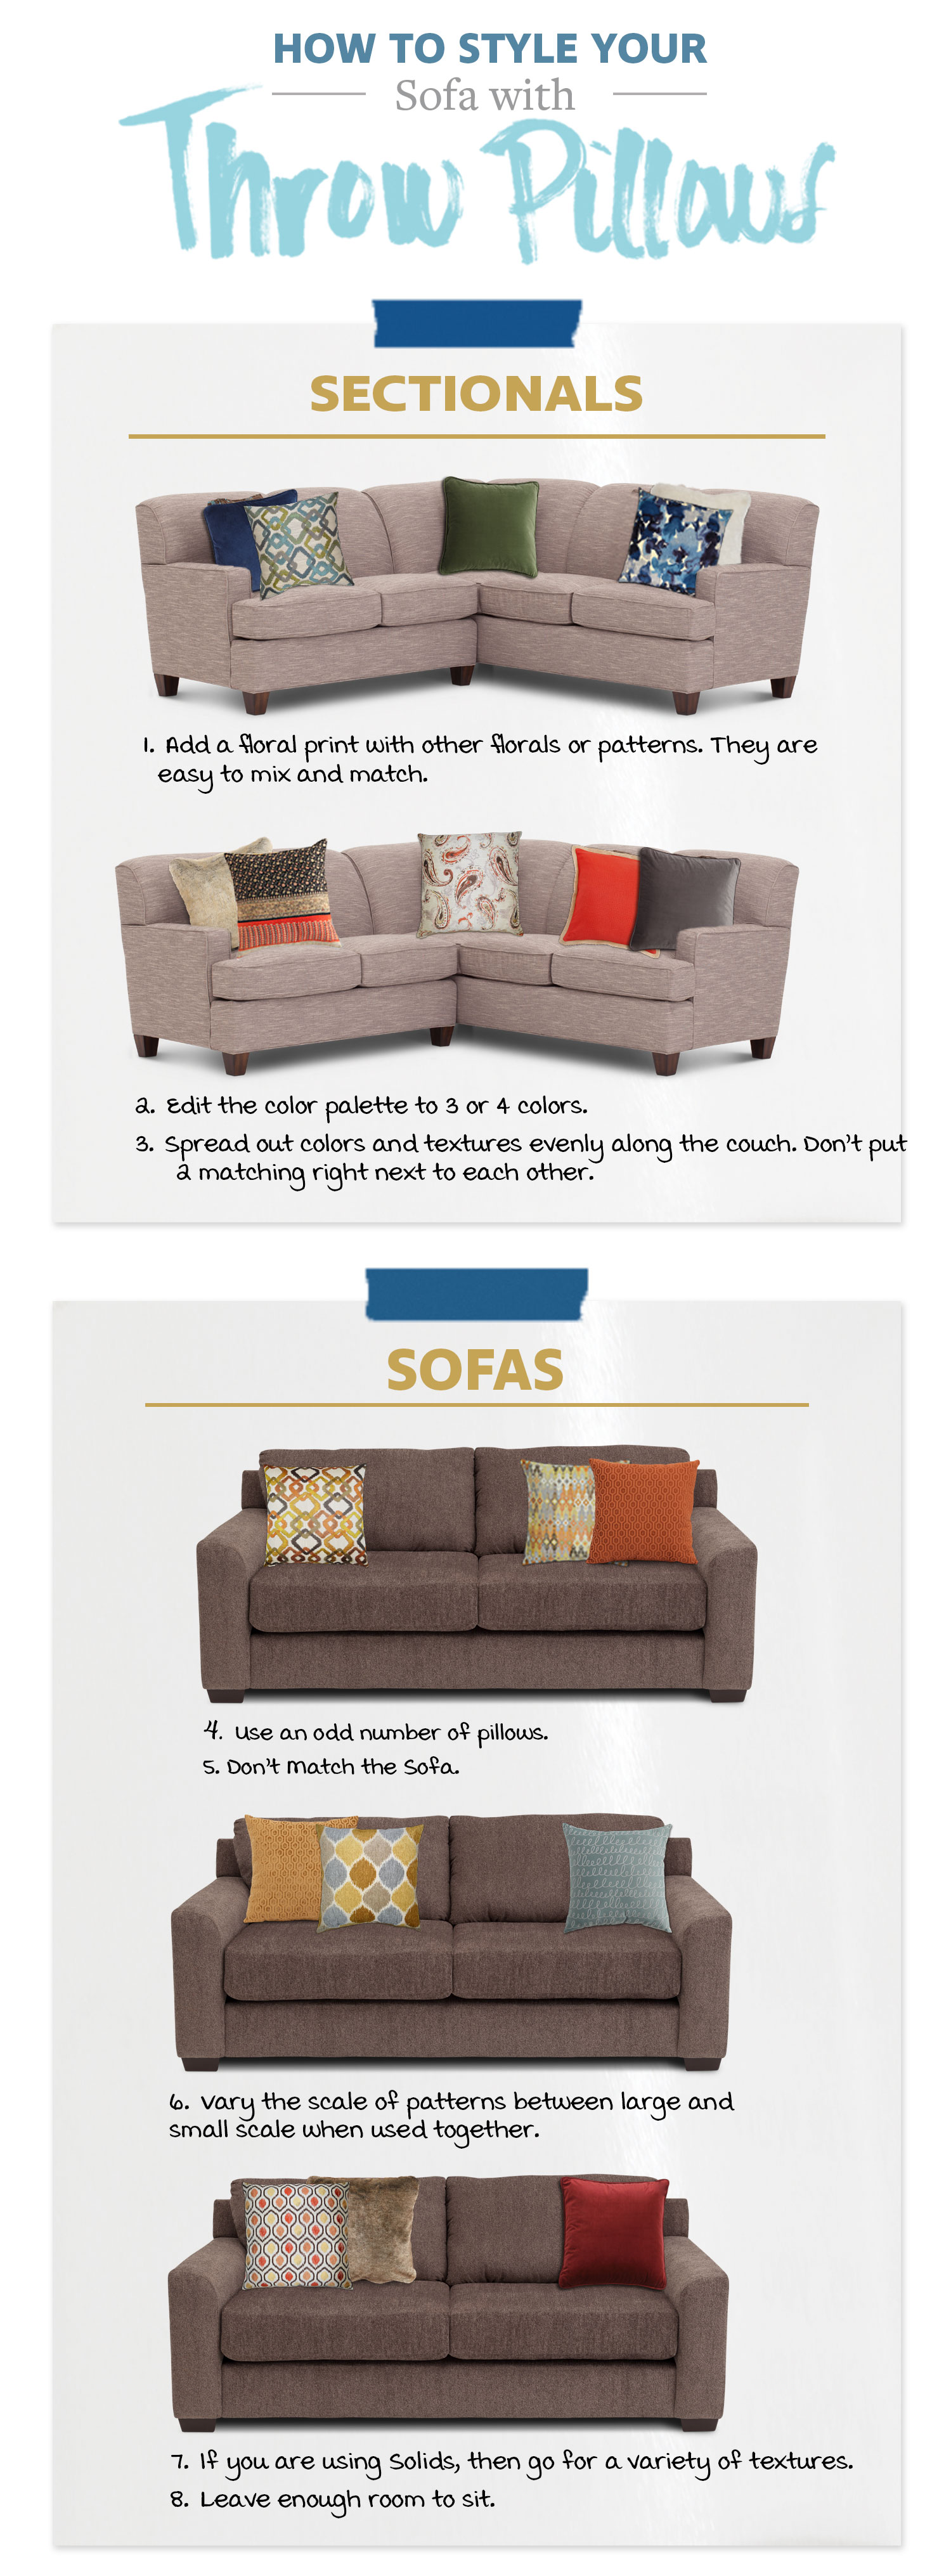 How to Mix and Match Pillows on a Sofa